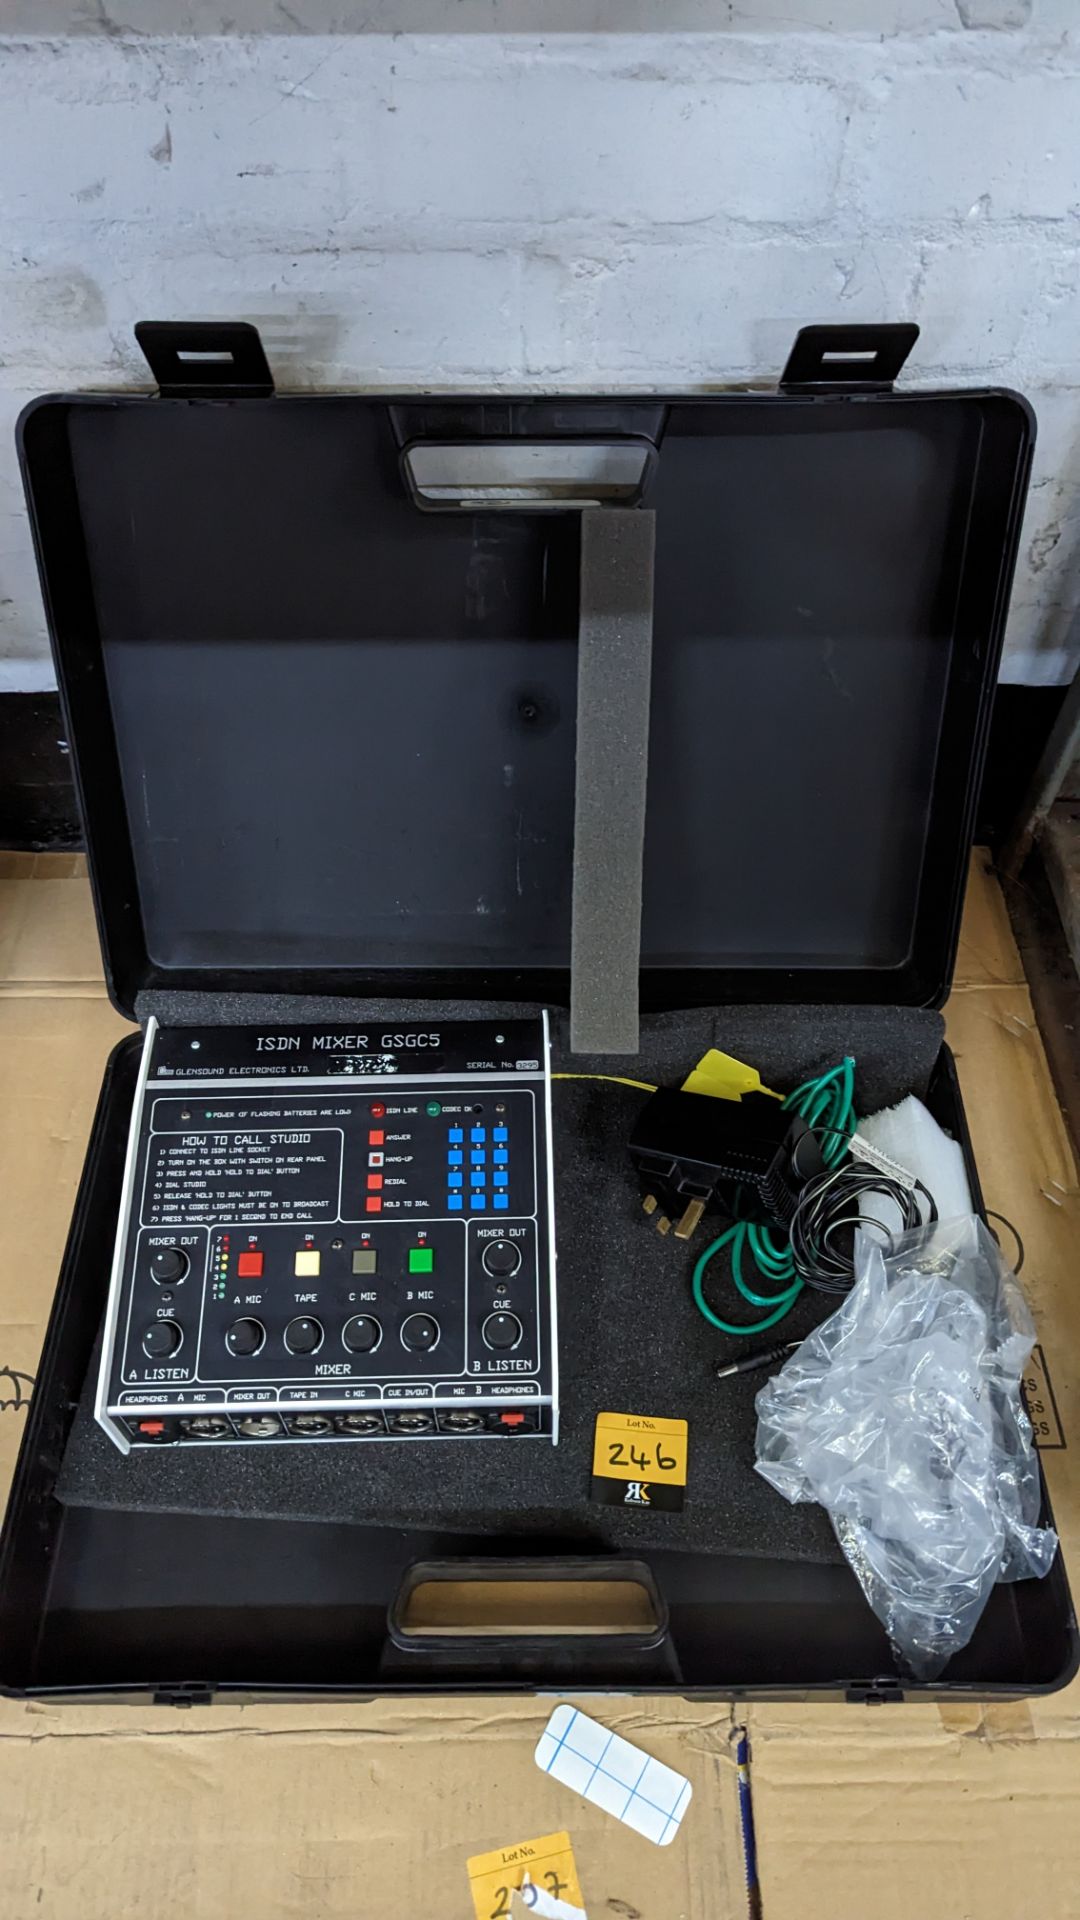 Glensound ISDN mixer, model GSGC5. Includes carry case and ancillaries